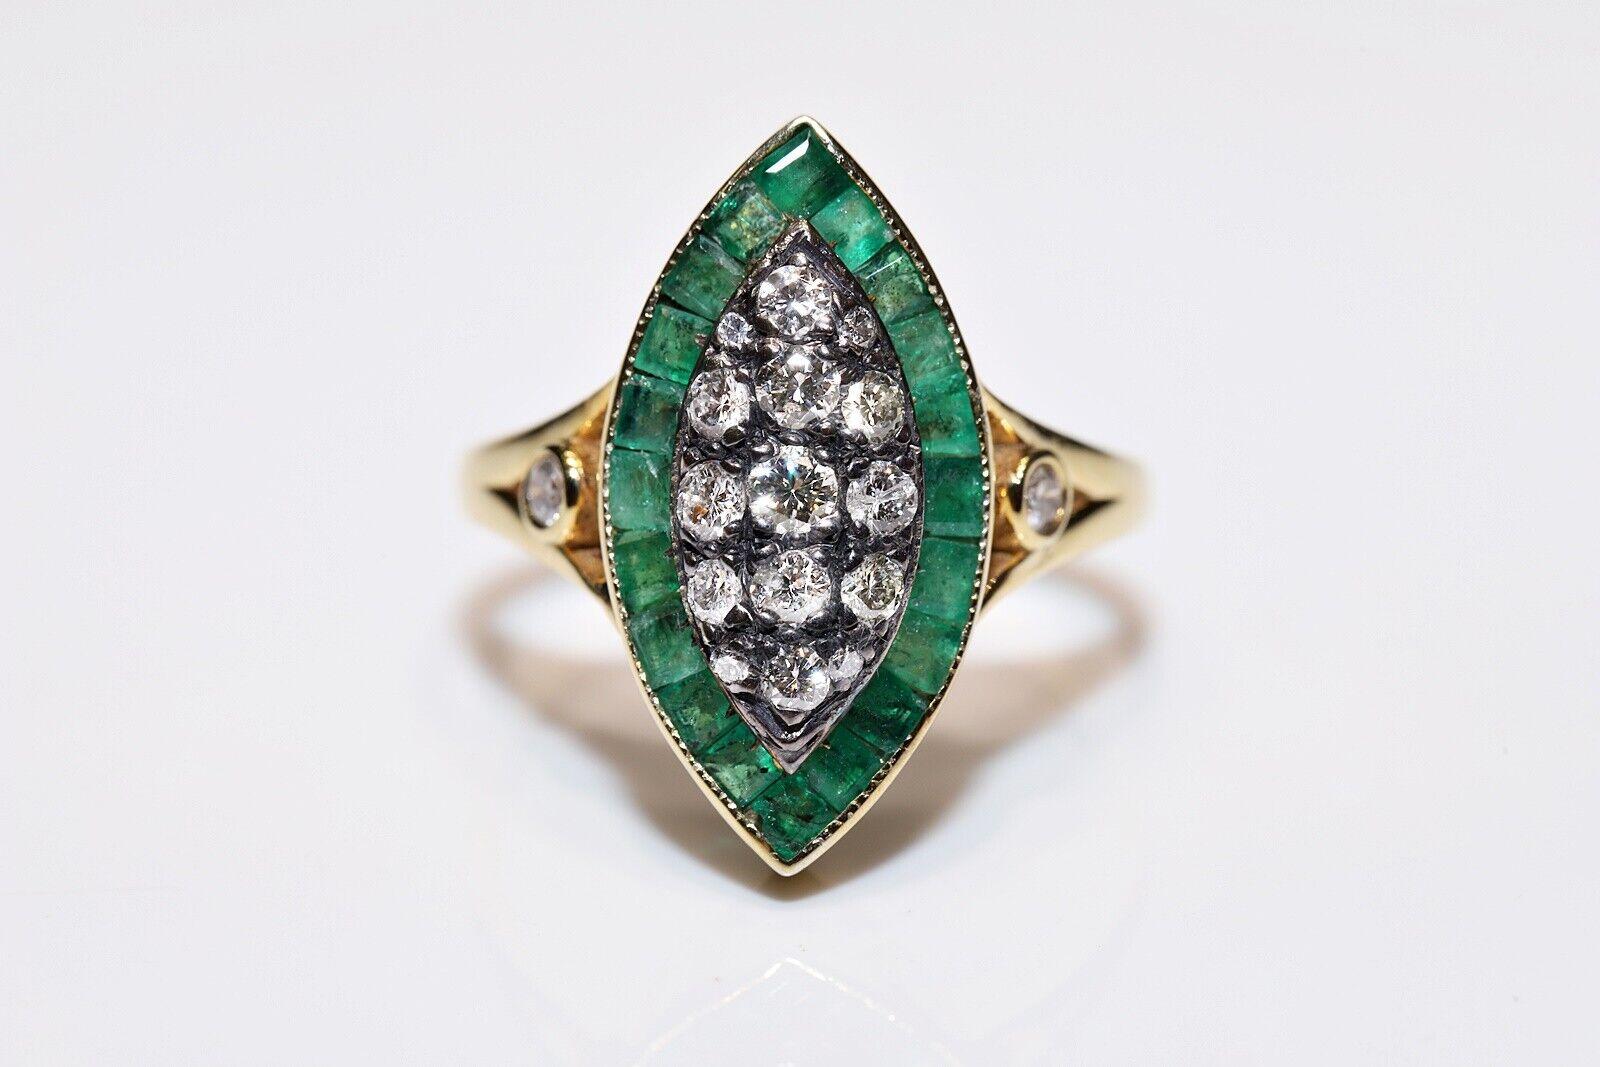 In very good condition.
Total weight 4.3 grams.
Totally is diamond totally 0.60 carat.
Acid tested to be 14k real gold.
The diamond is has  G-H-I-J color and vs clarity.
Totally is emerald 1.50 carat.
Ring size is US 7 (We offer free resizing)
We